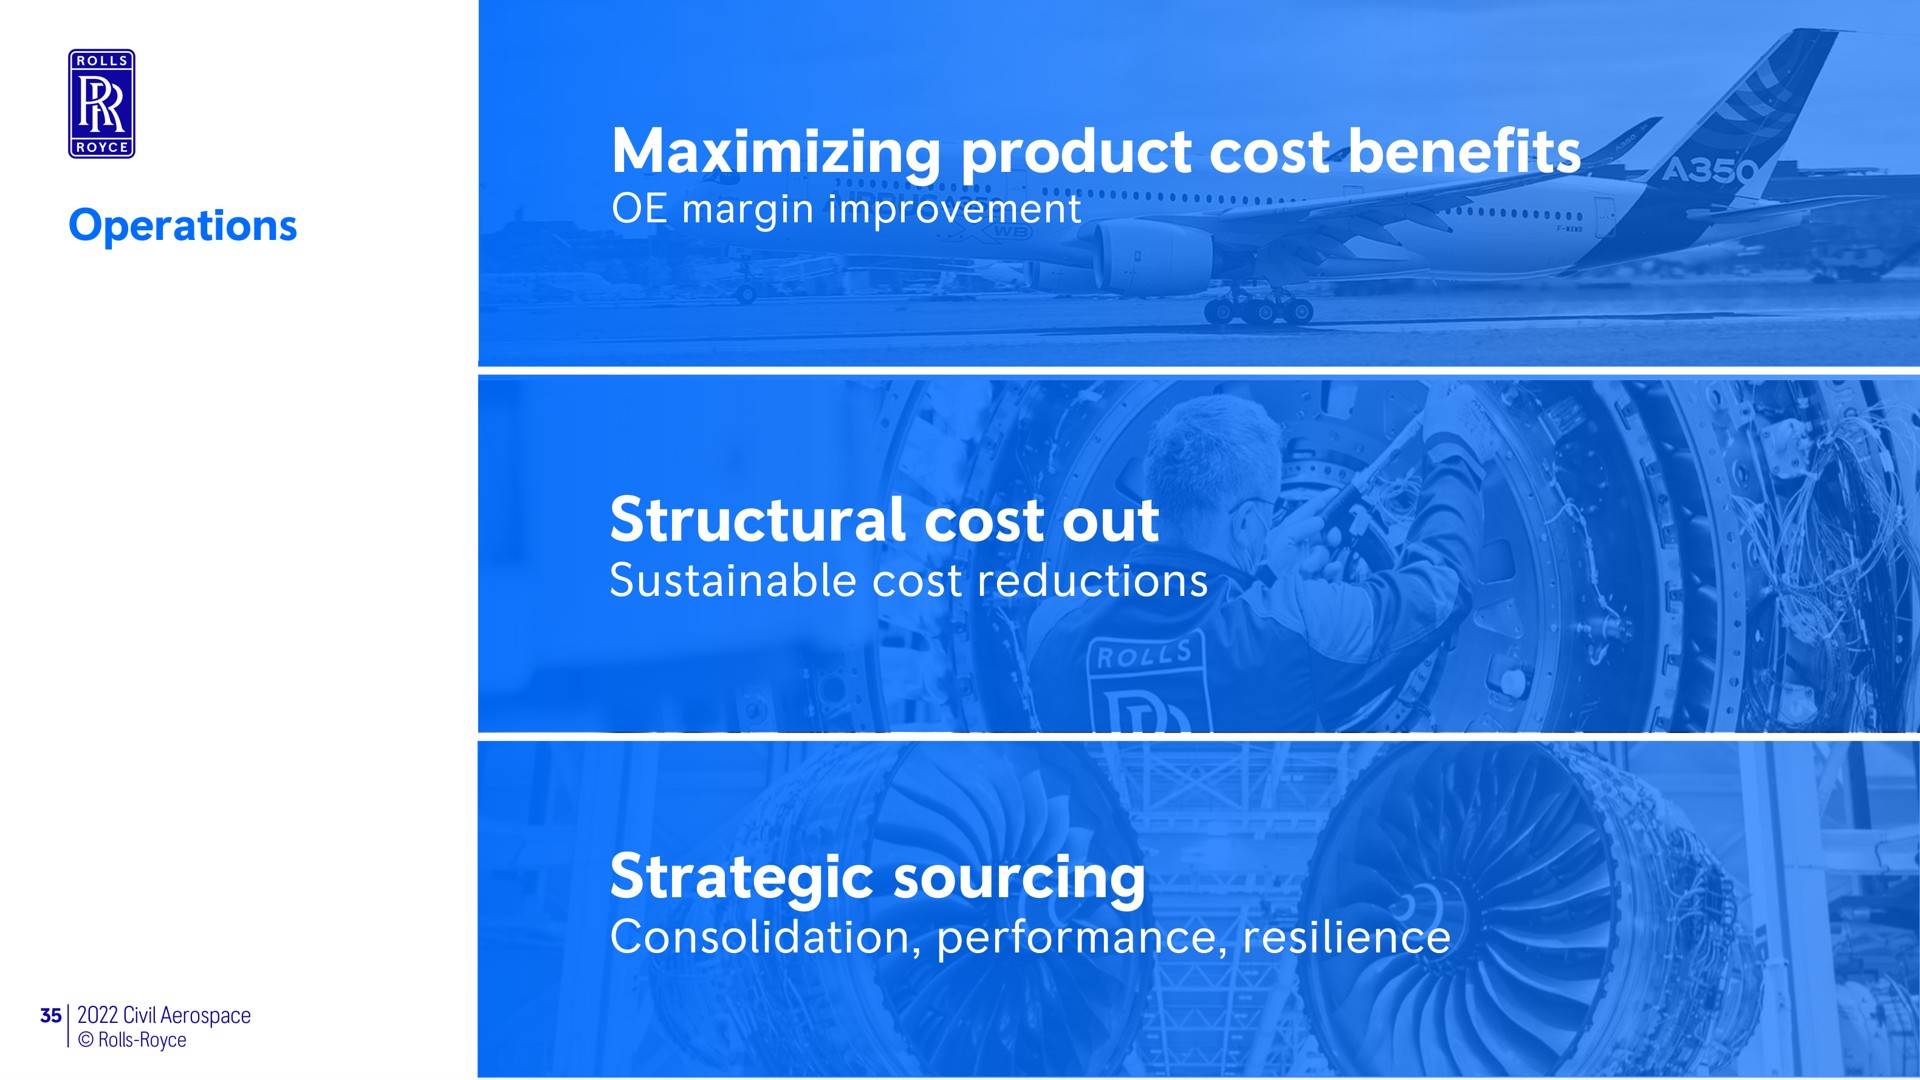 operations maximizing product cost benefits margin improvement structural cost out sustainable cost reductions strategic sourcing consolidation performance resilience | Rolls-Royce Holdings